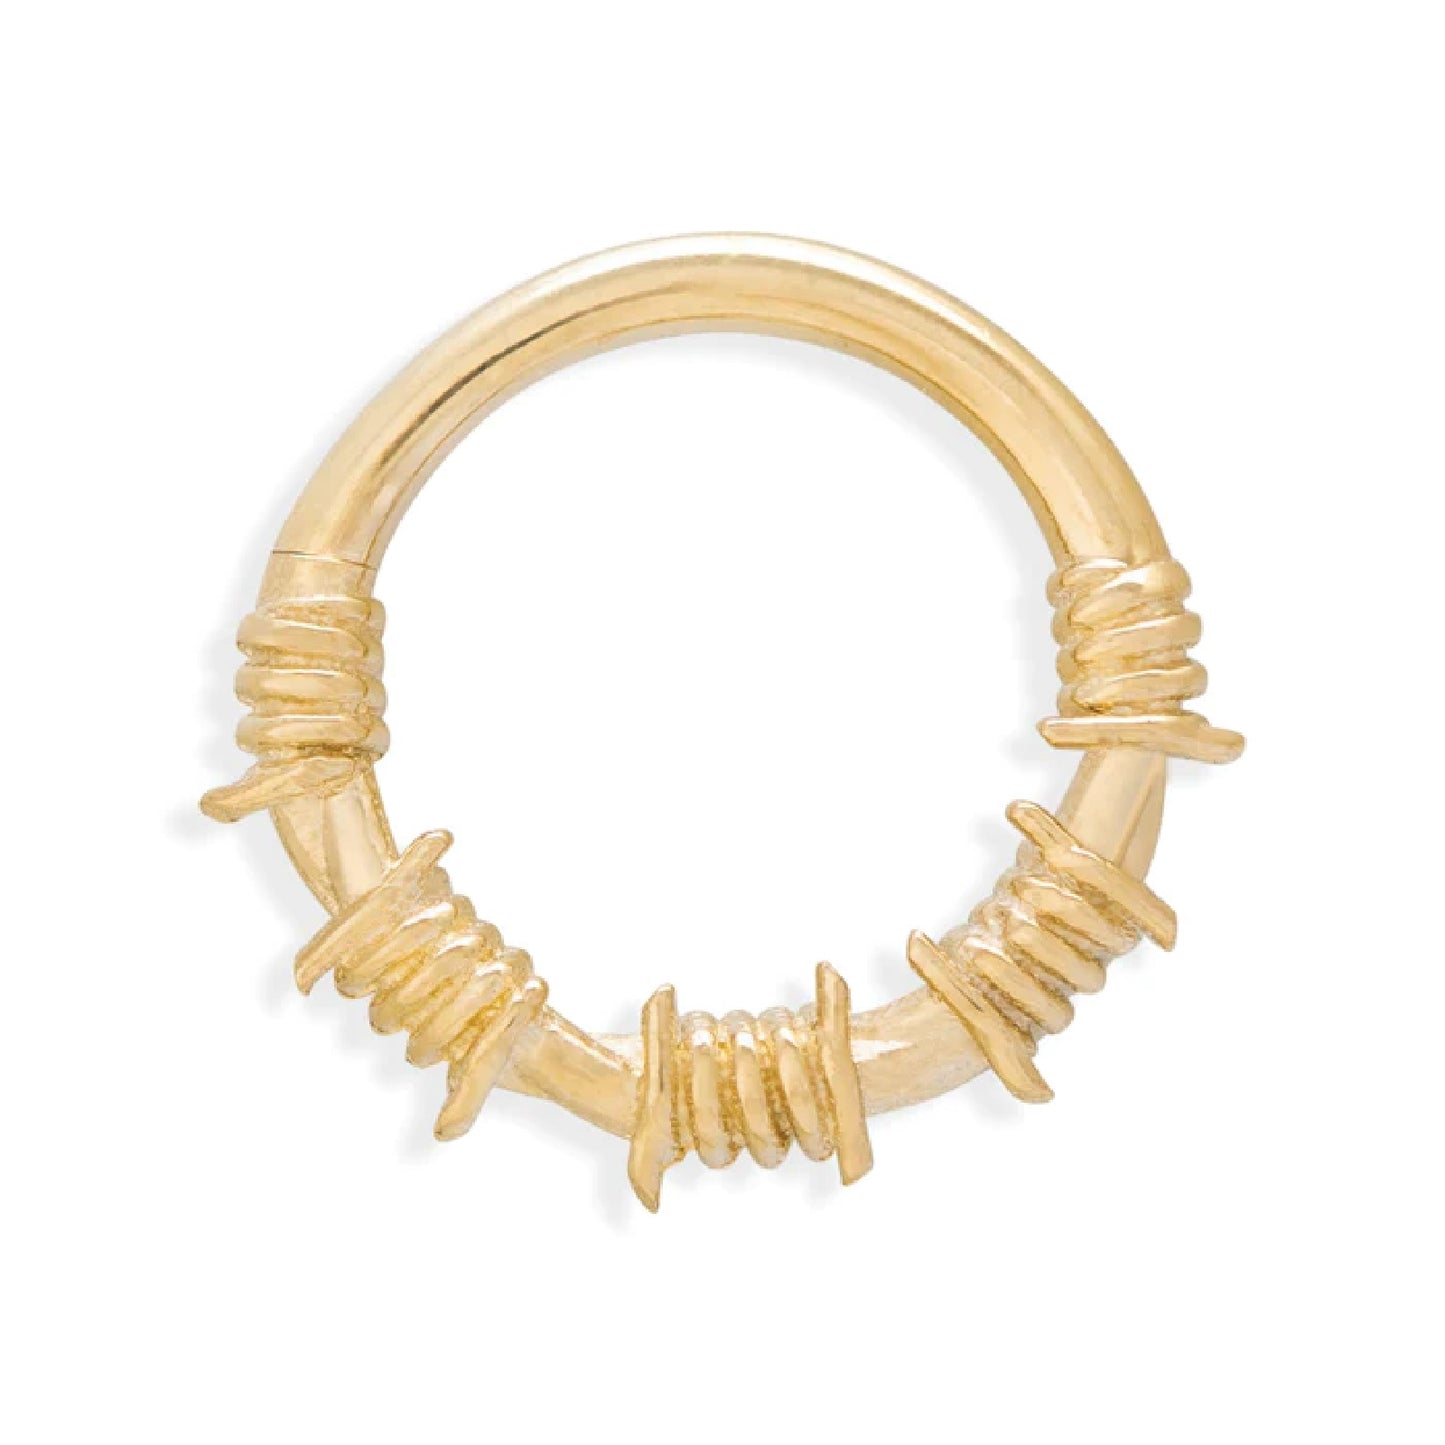 Tawapa - Barbed Wire - Seam Ring - 14kt Solid Gold